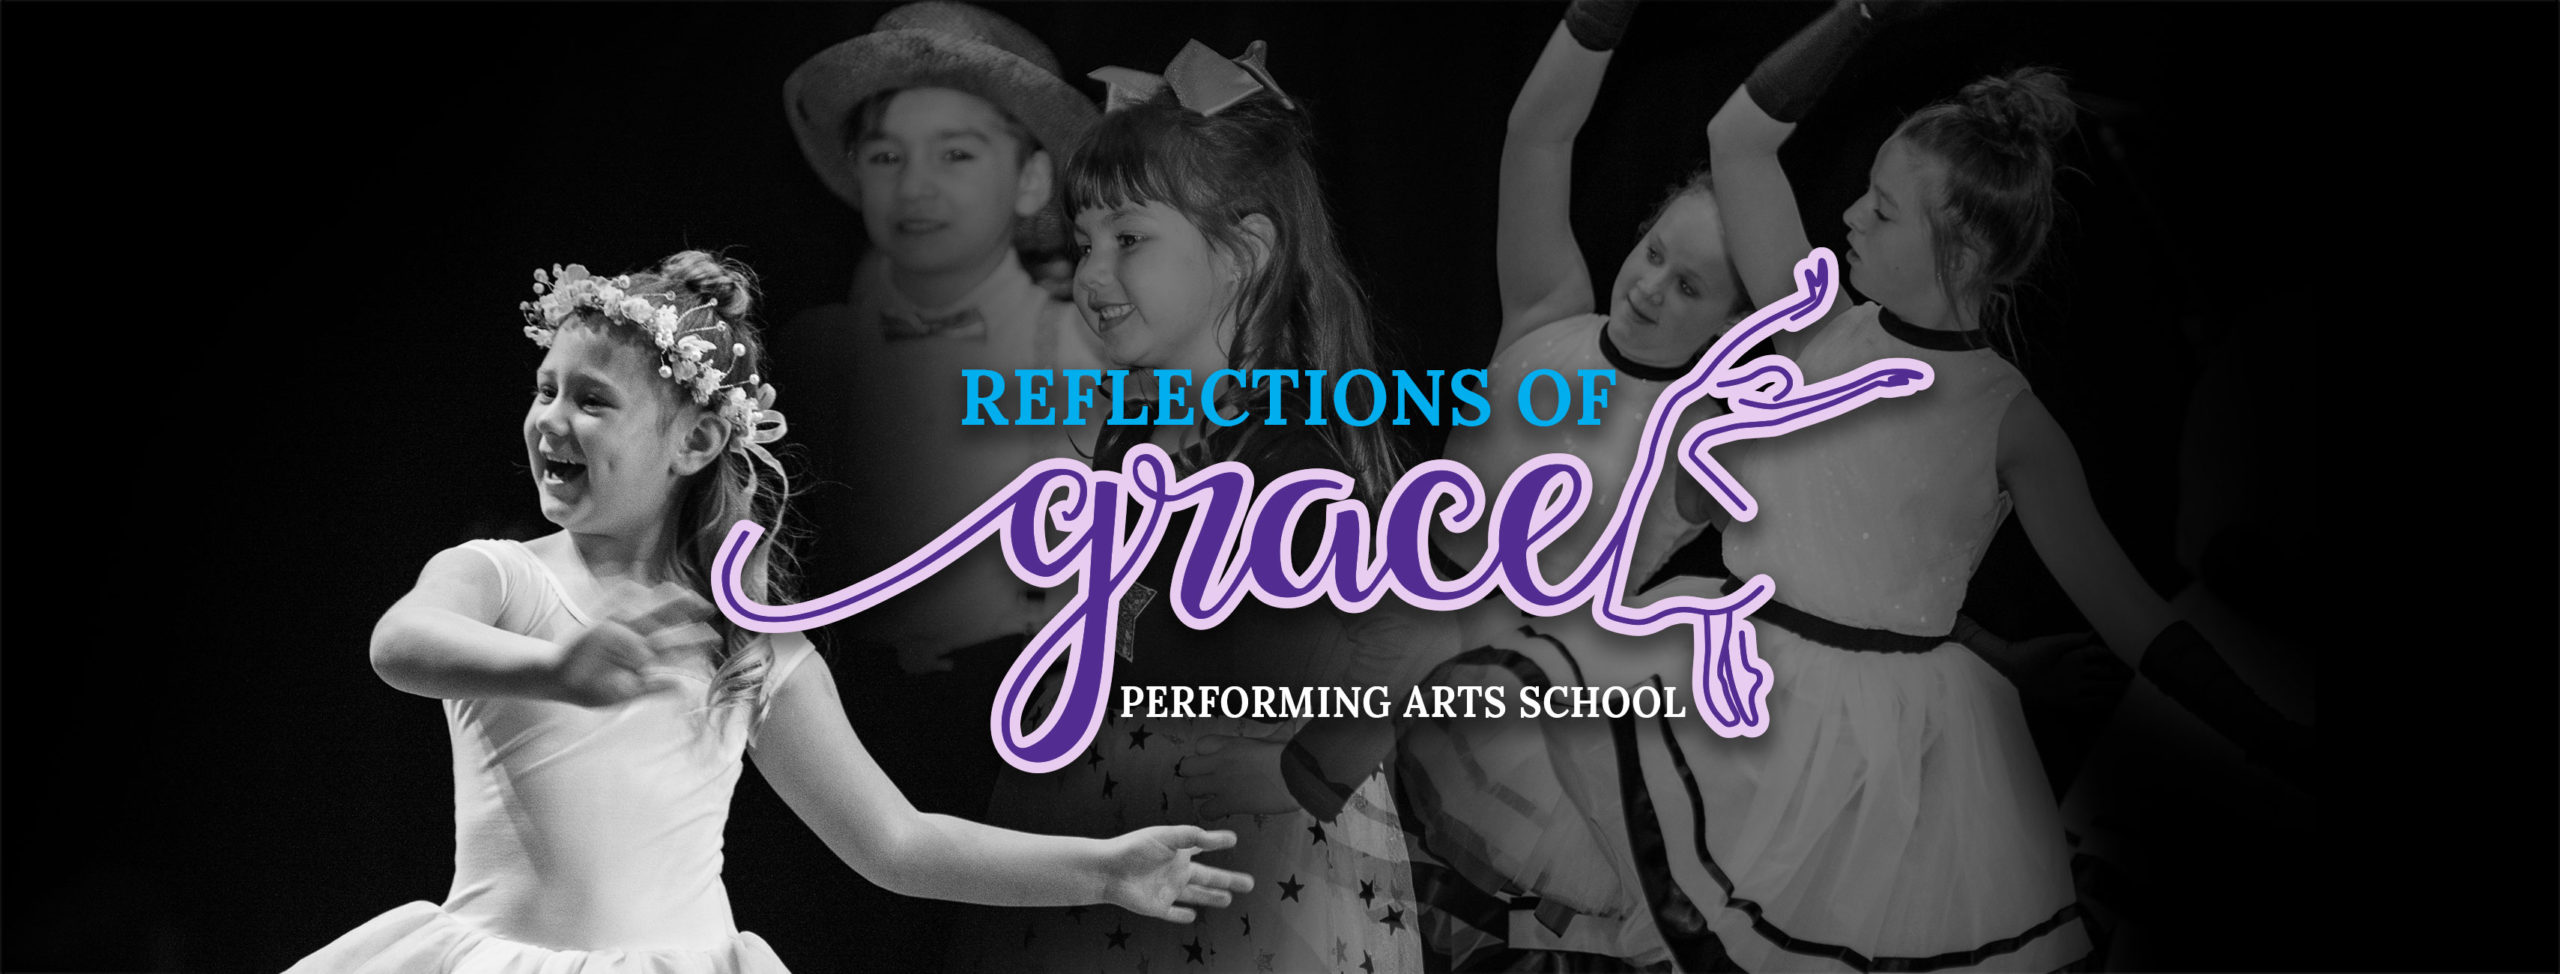 Reflections of Grace Performing Arts School